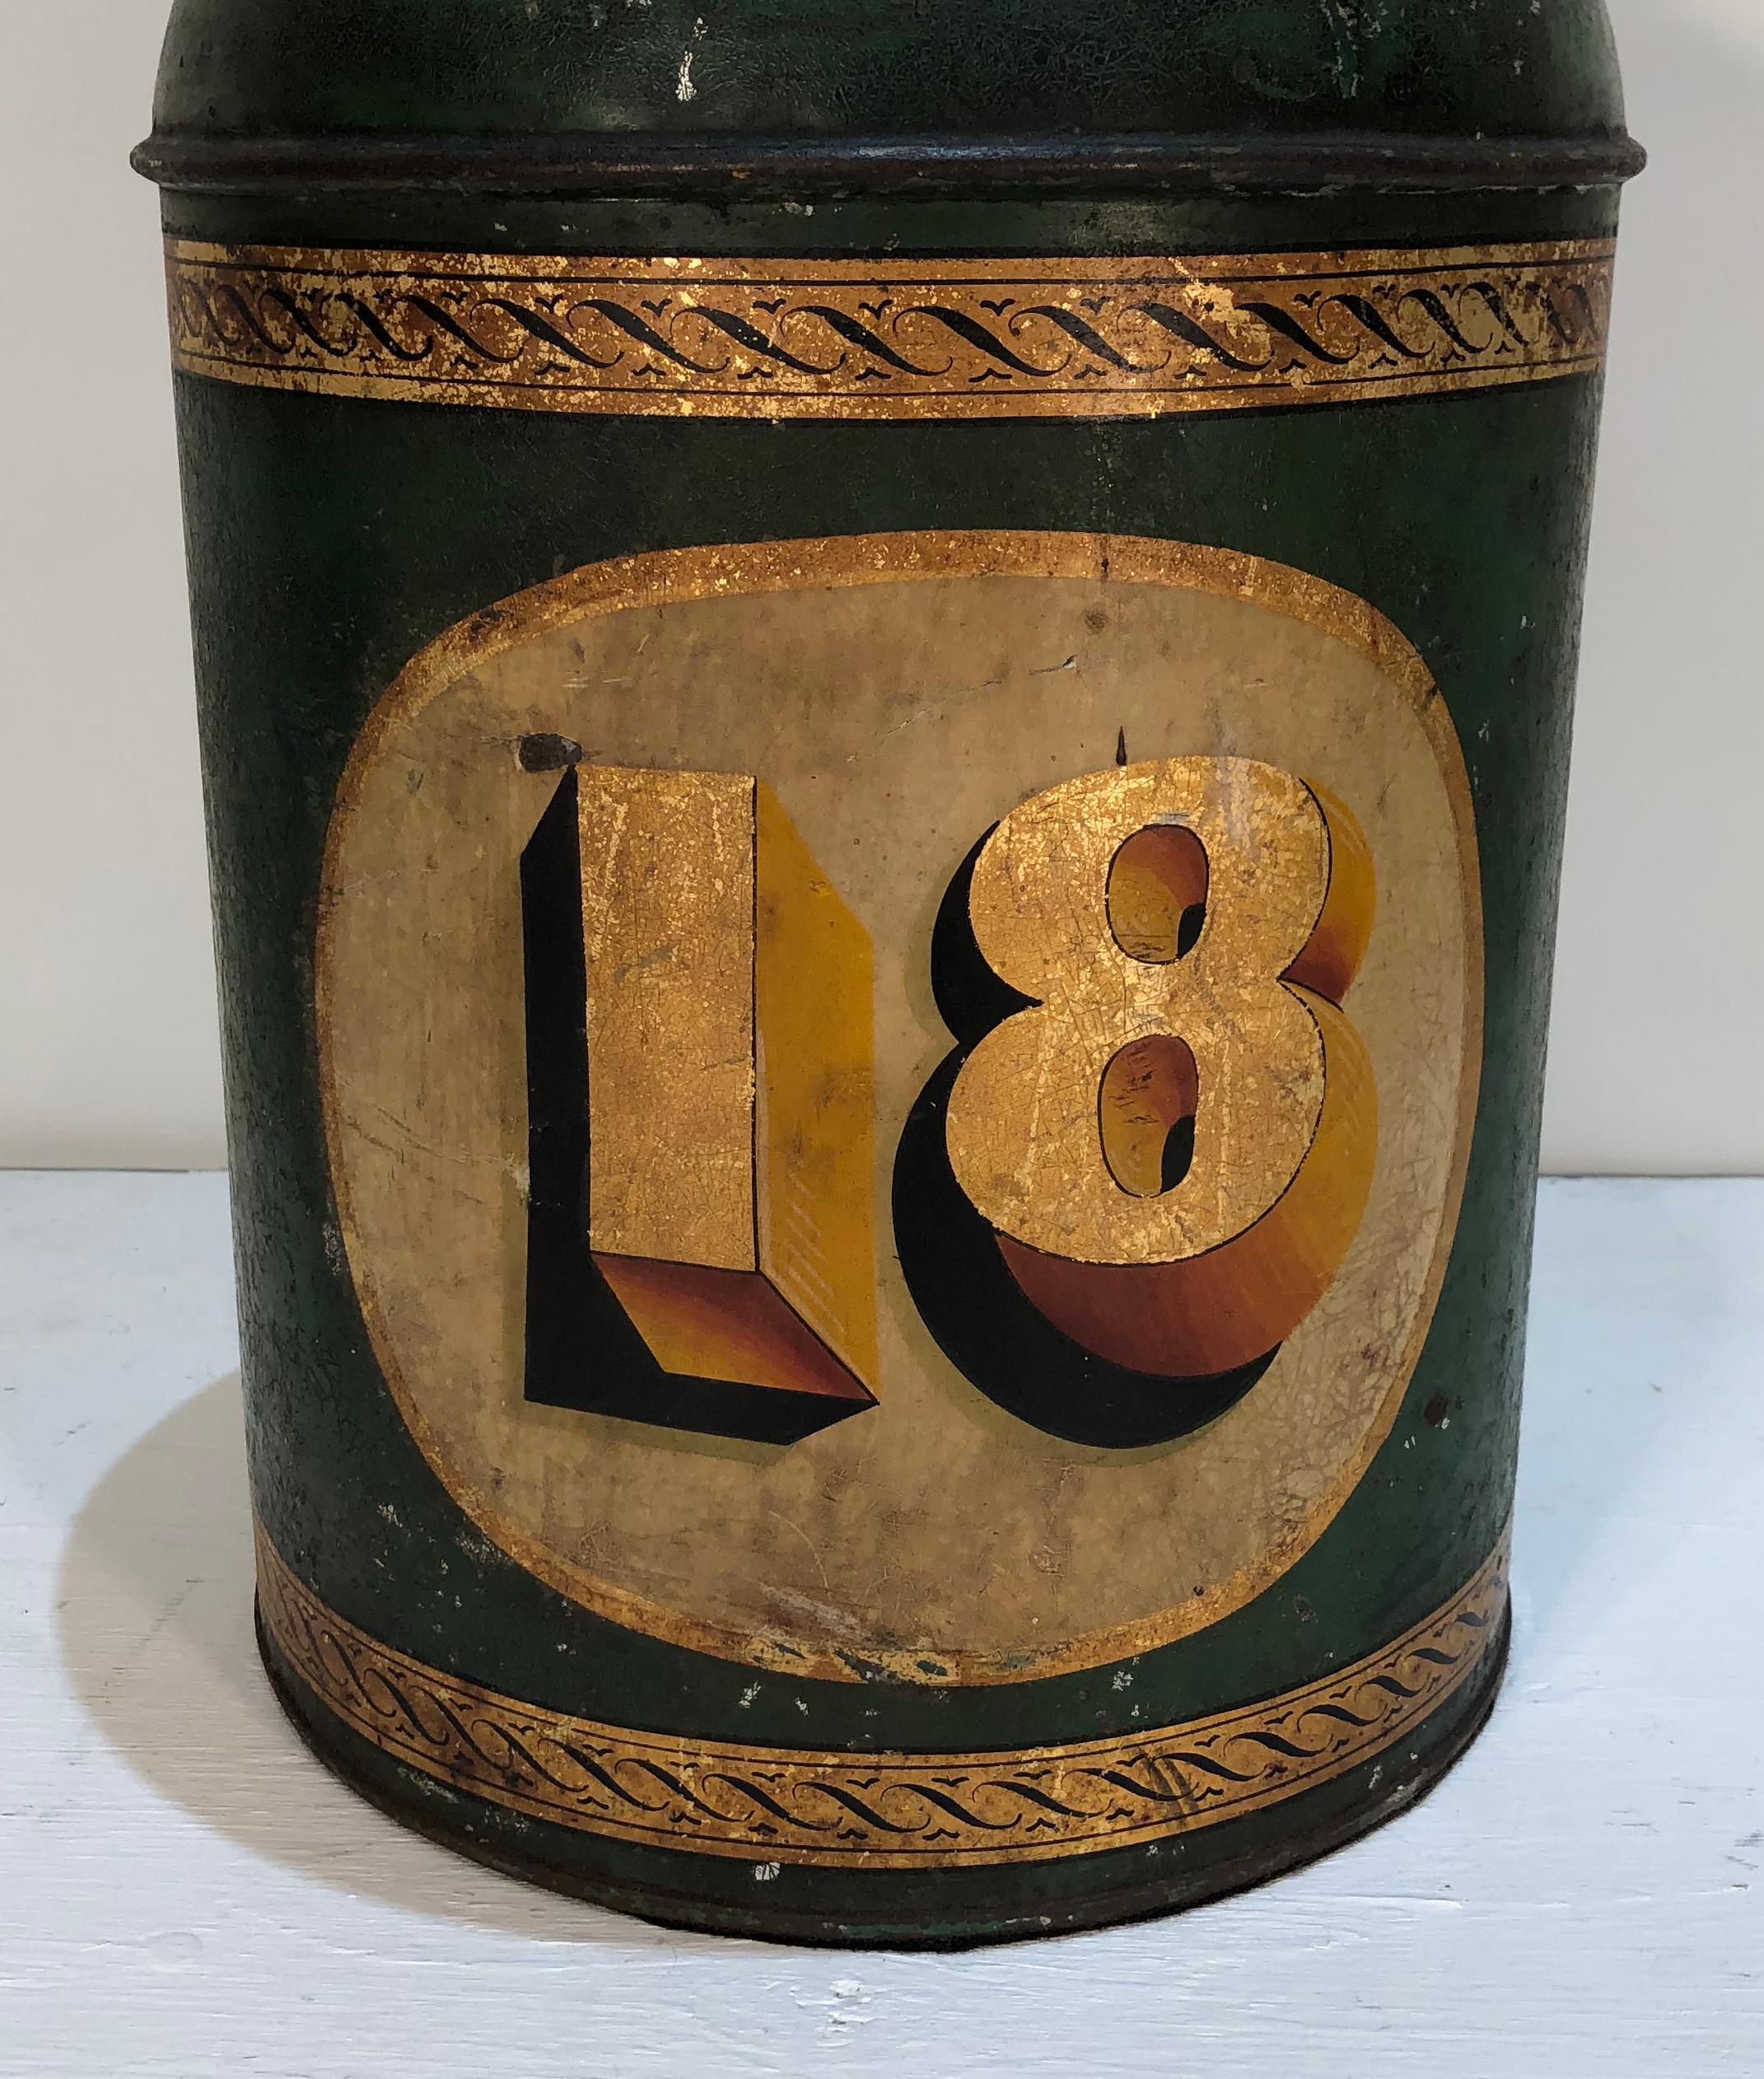 Chinese Export Mid-19th Century English Tole Spice or Tea Canister, Now as a Lamp